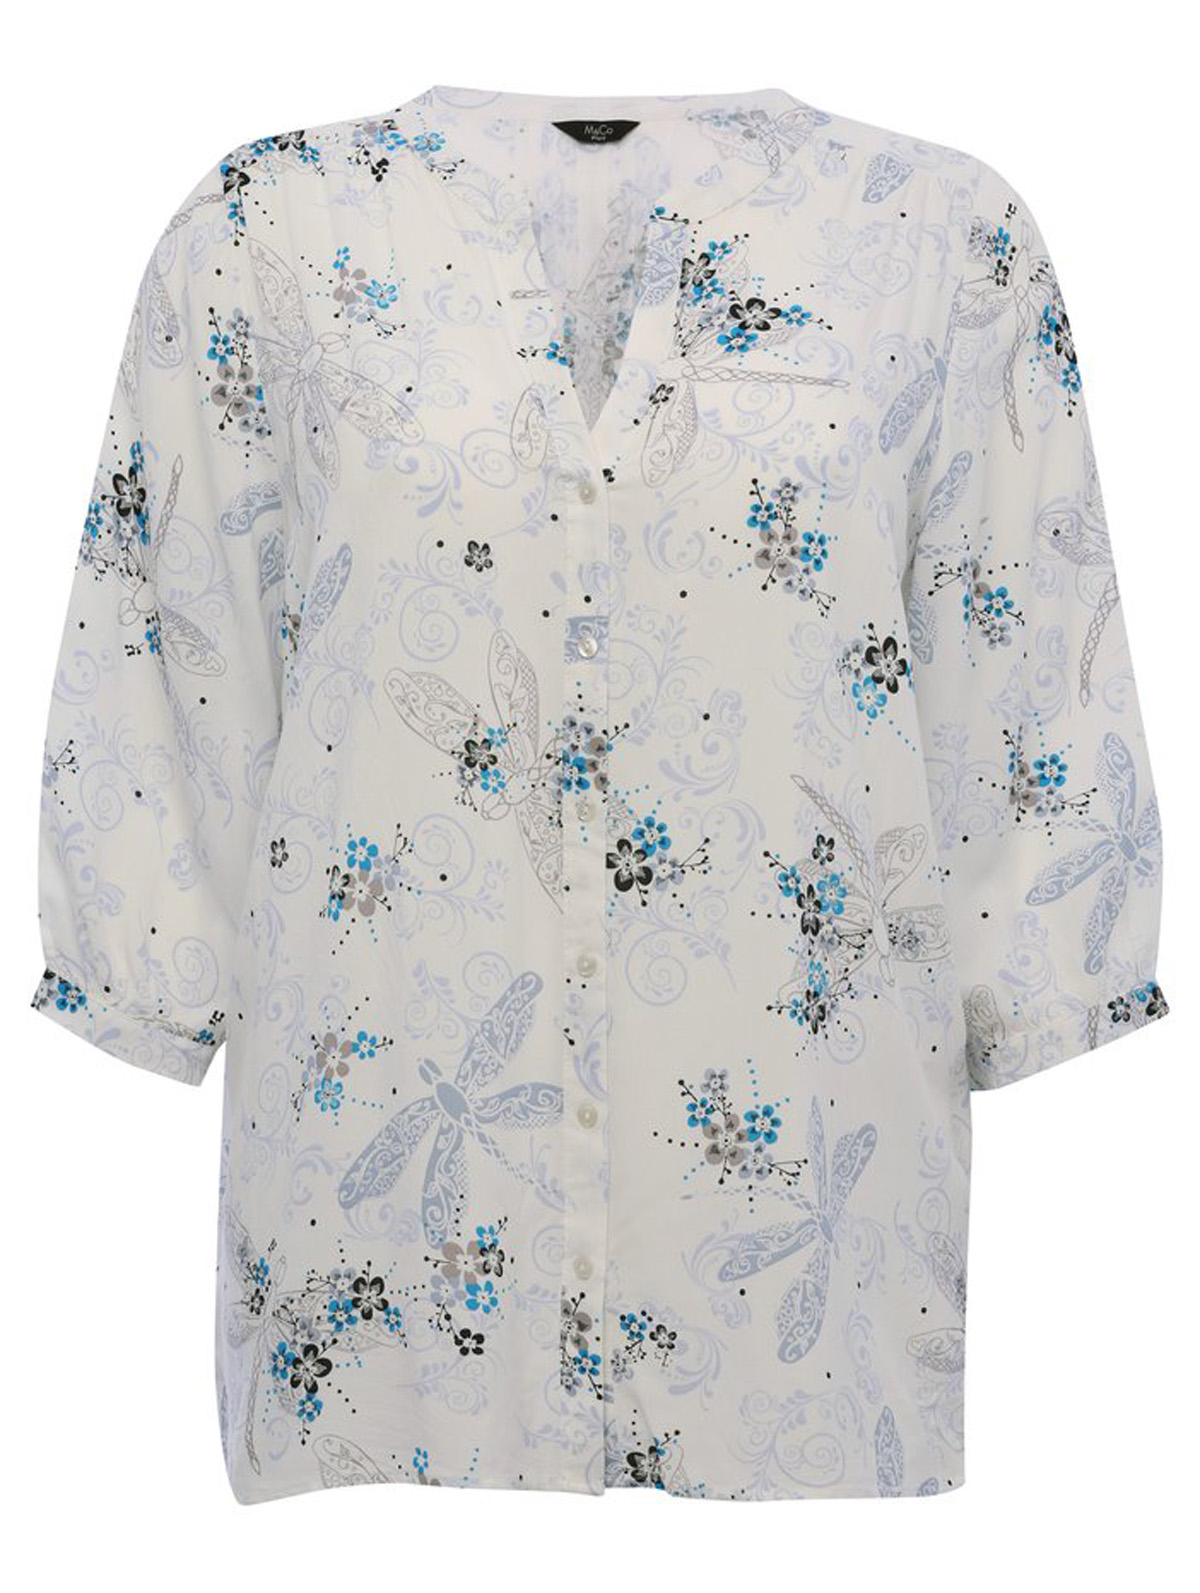 M&Co - - M&Co IVORY Floral Print Shirt - Plus Size 18 to 28